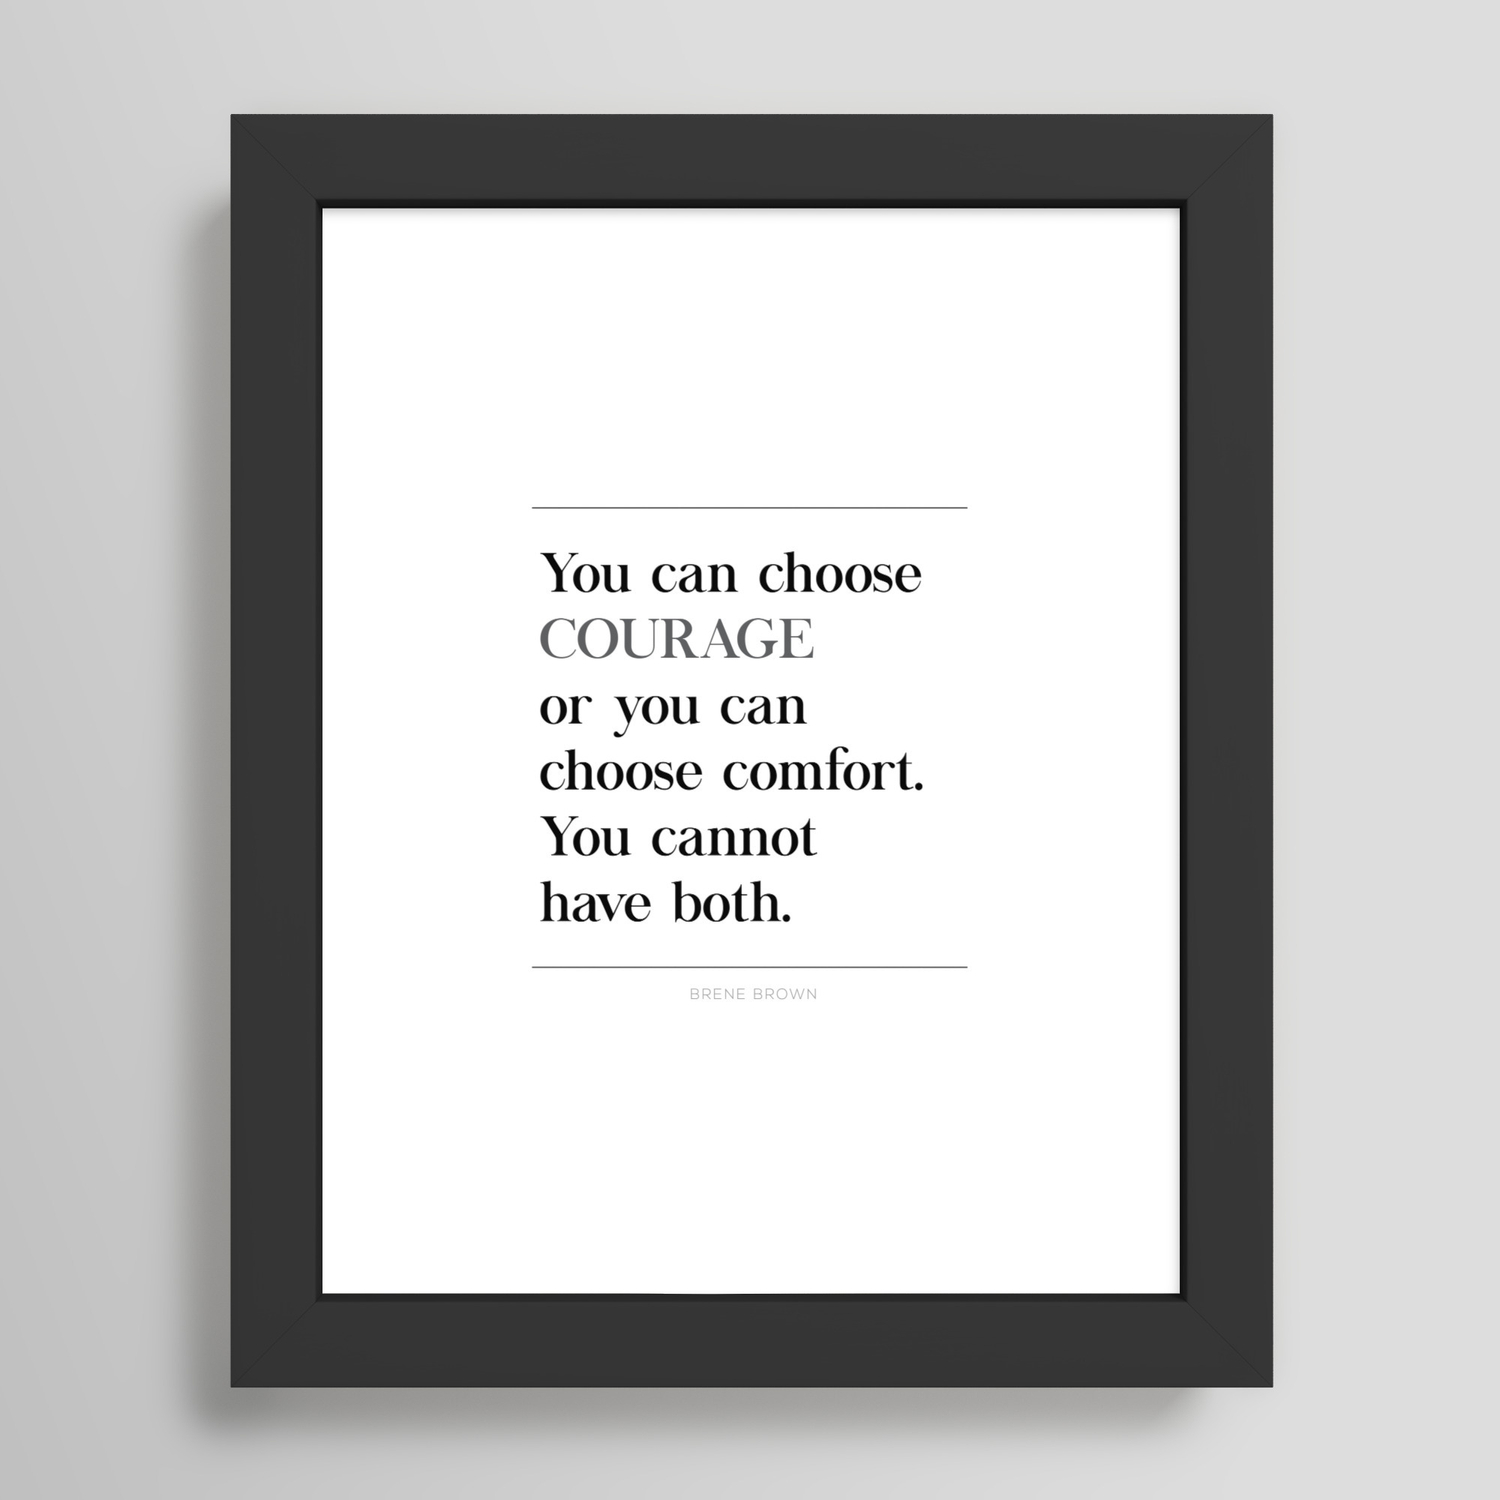 Download Print & Frame 8x10 5x7 Wall Art 4x6 Brene Brown Quote Gift and 11x14 Digital Print Perfectionism is the Enemy of Done